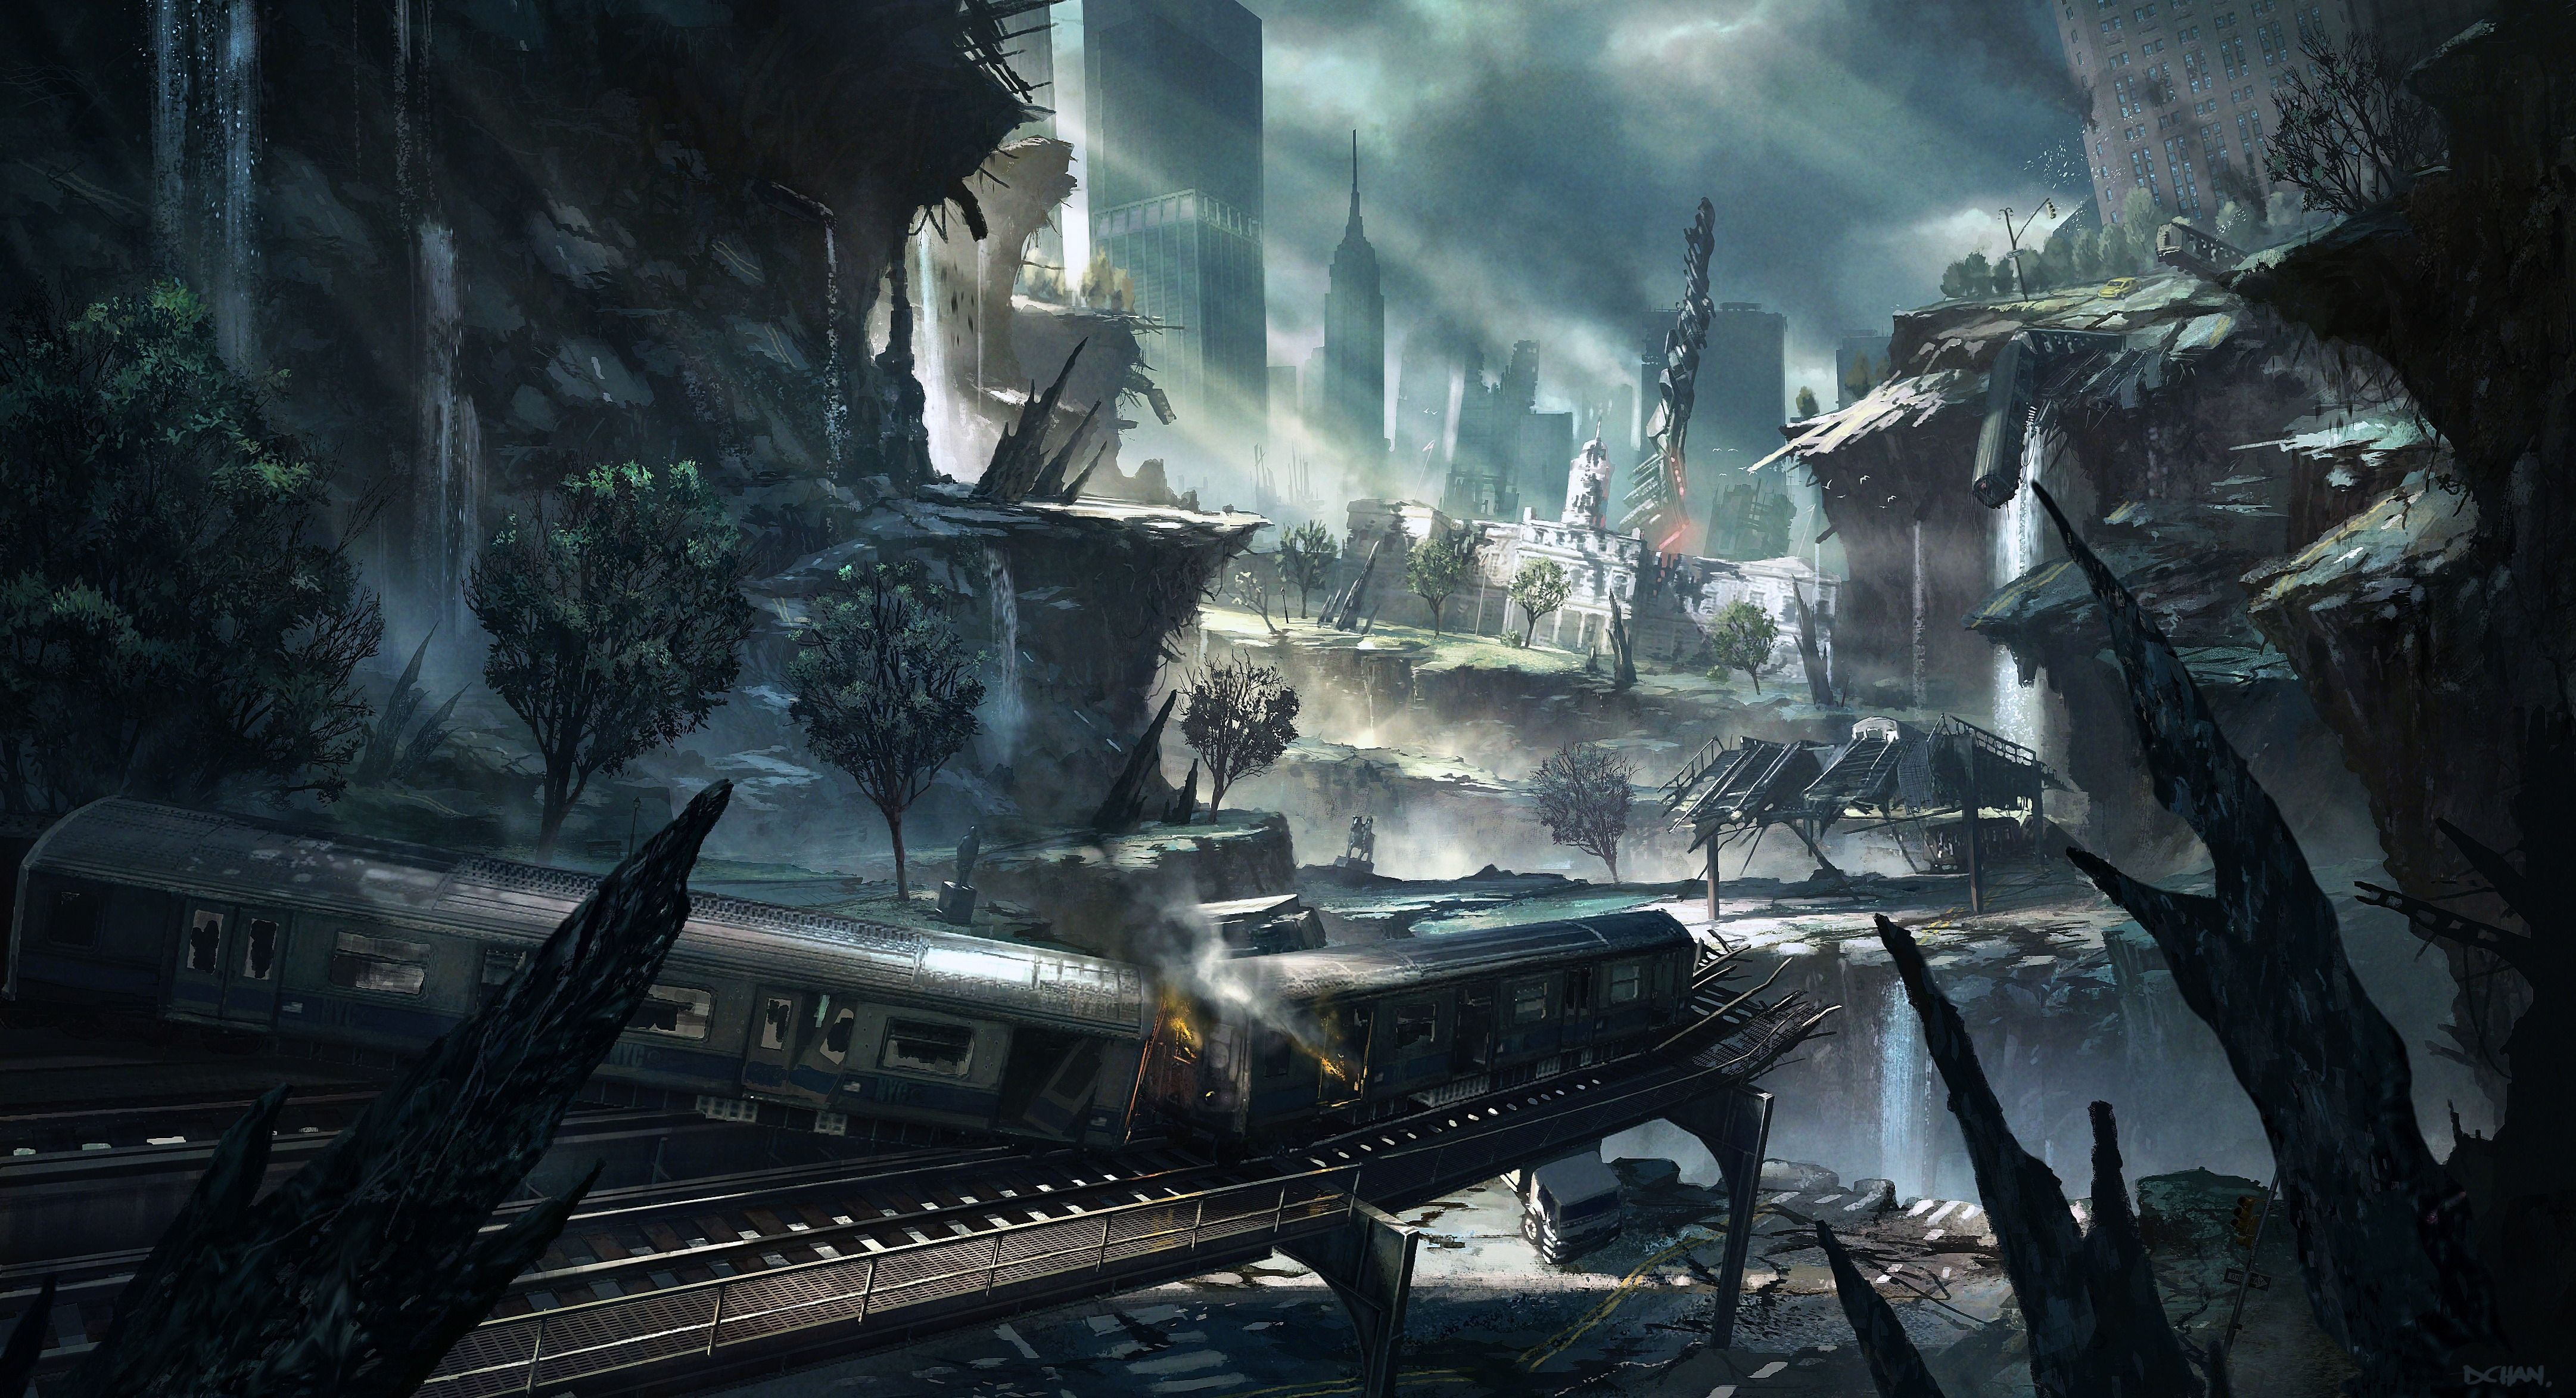 crysis, Sci fi, Weapons, Apocalyptic, Destruction, Ruins Wallpaper